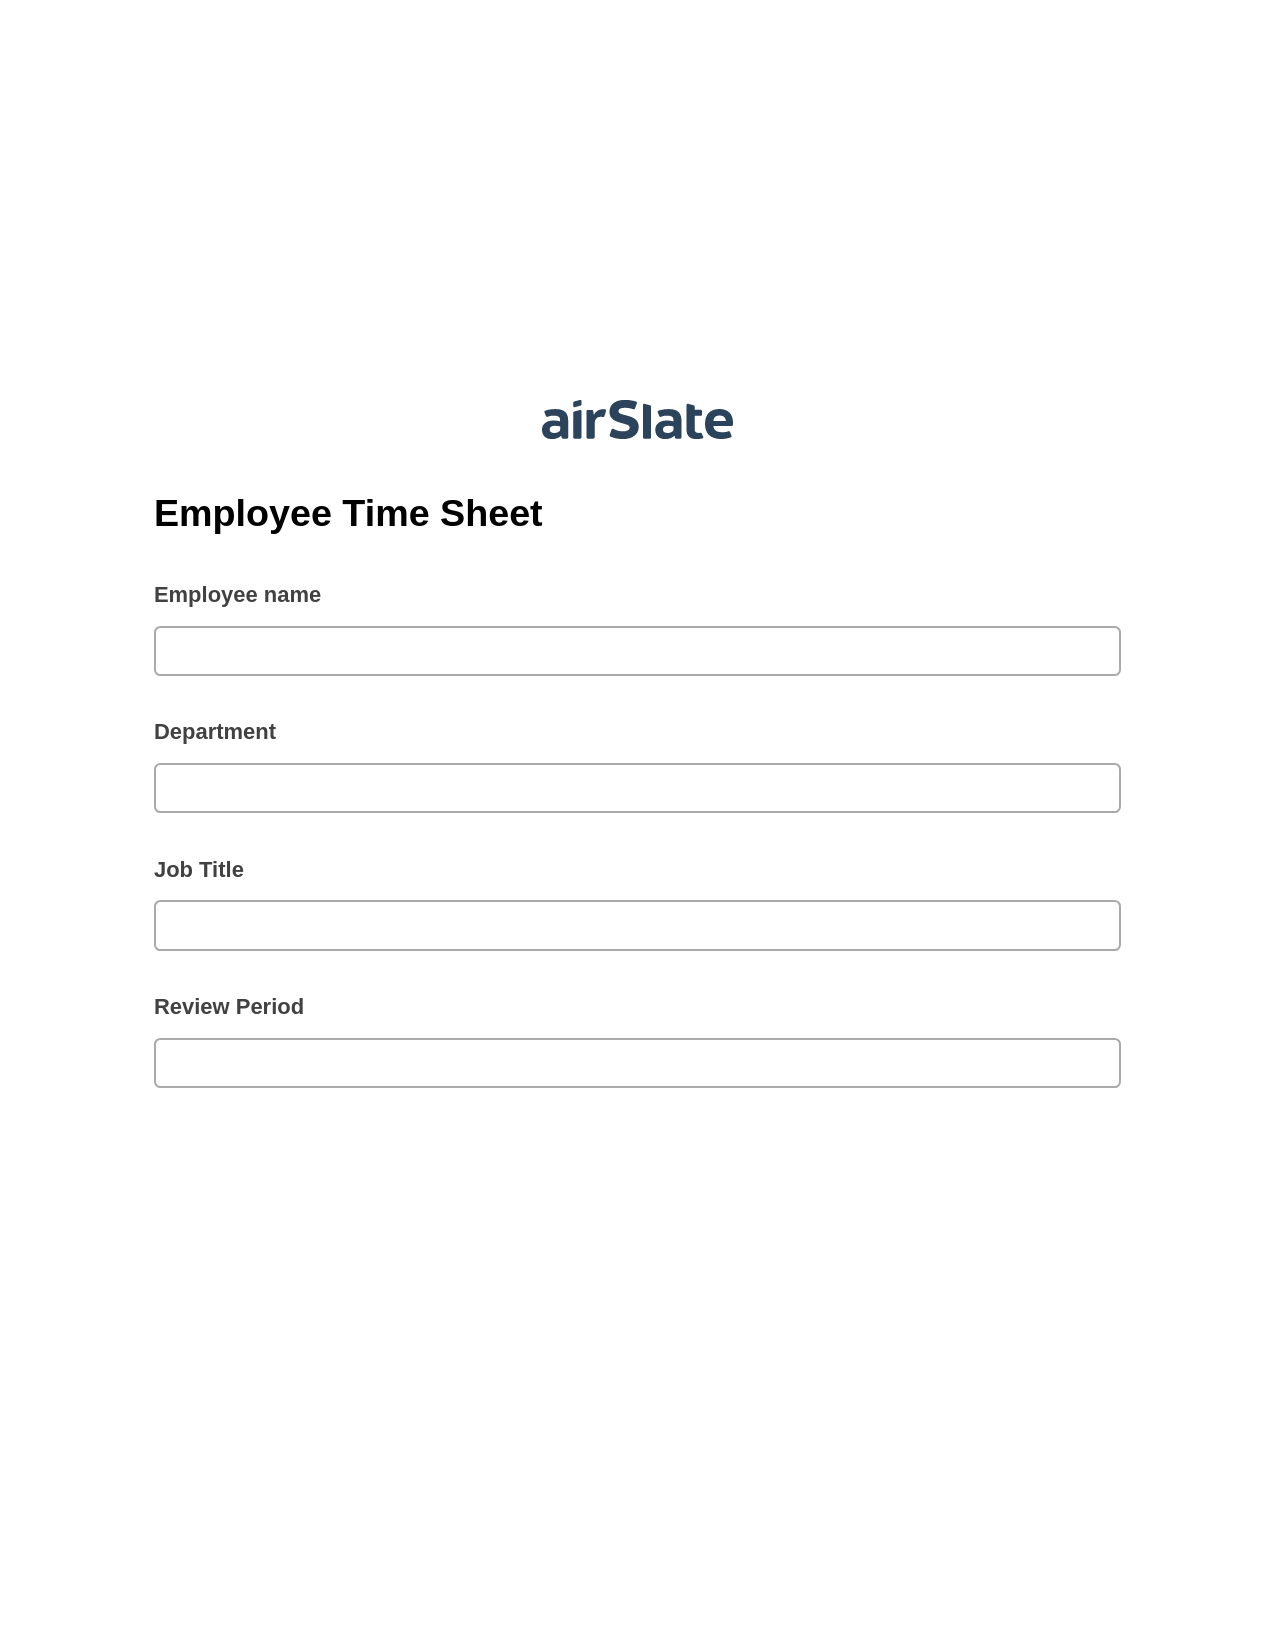 Employee Time Sheet Pre-fill Dropdowns from Excel Bot, Update Audit Trail Bot, Post-finish Document Bot